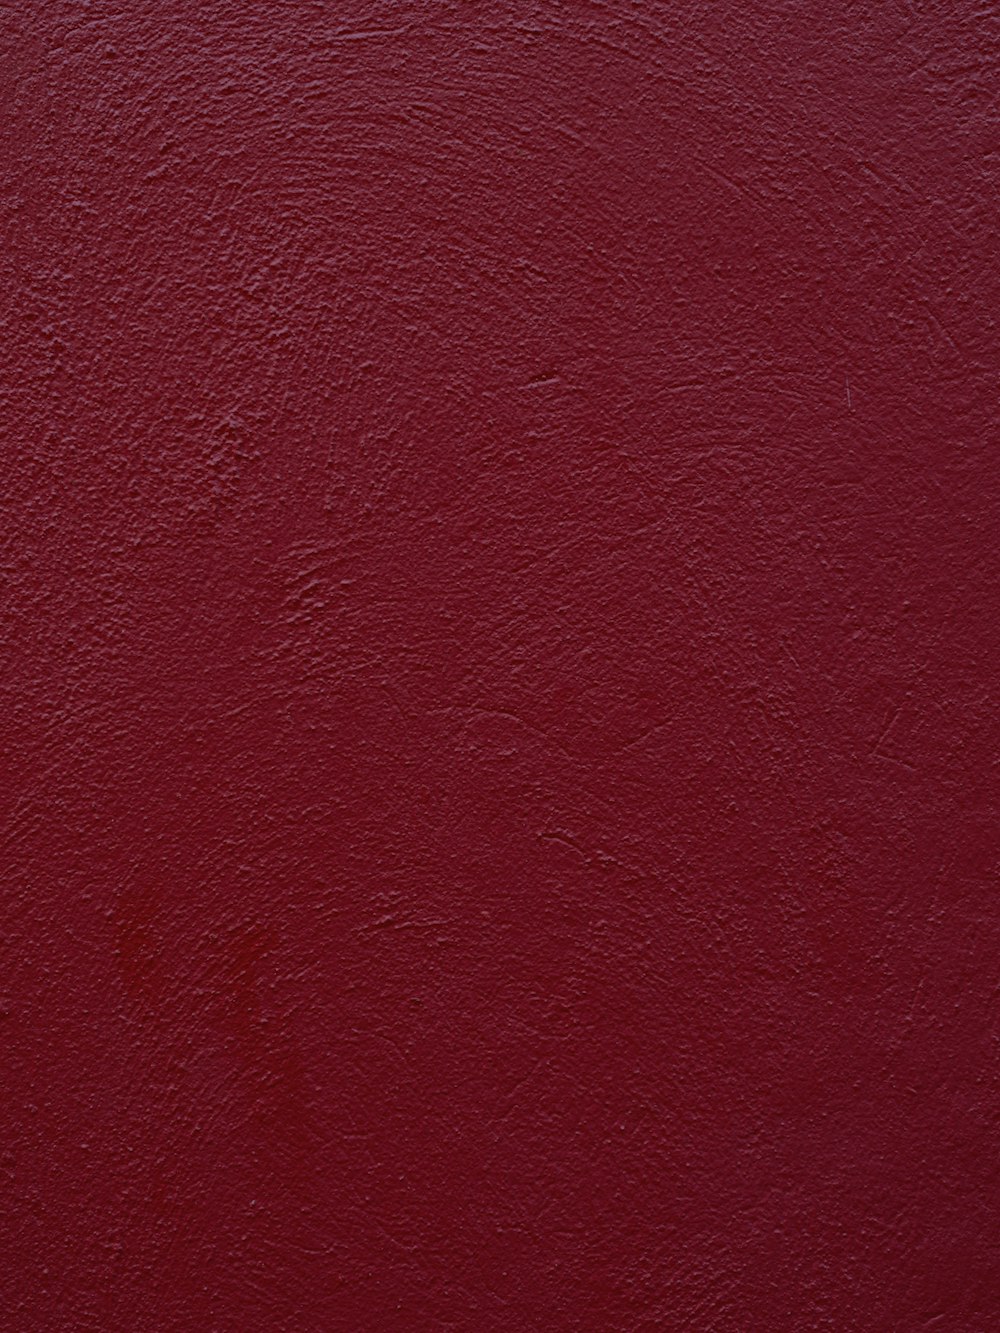 a close up of a red wall with a white clock on it